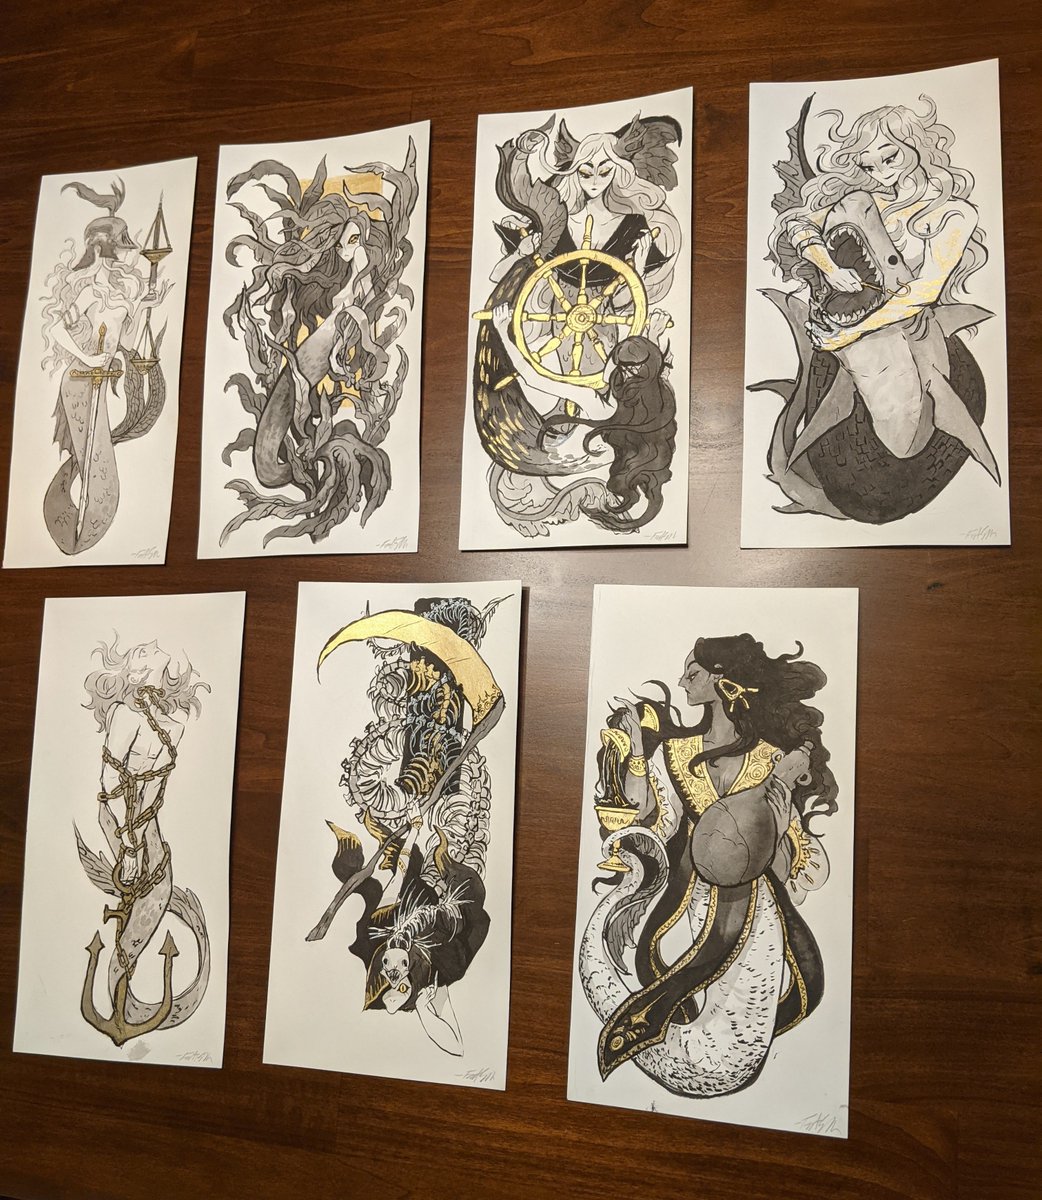 Batch 2 of my Mermay Tarot originals goes live Saturday, 5/22 at 9AM pacific! 🧜🧜‍♂️🧜‍♀️
Here's what will be in this batch, you can check out the sale preview for more details here:
https://t.co/Gst1BVBdJS
And here's the link for my shop when it goes live:
https://t.co/apz9qF5C9i 